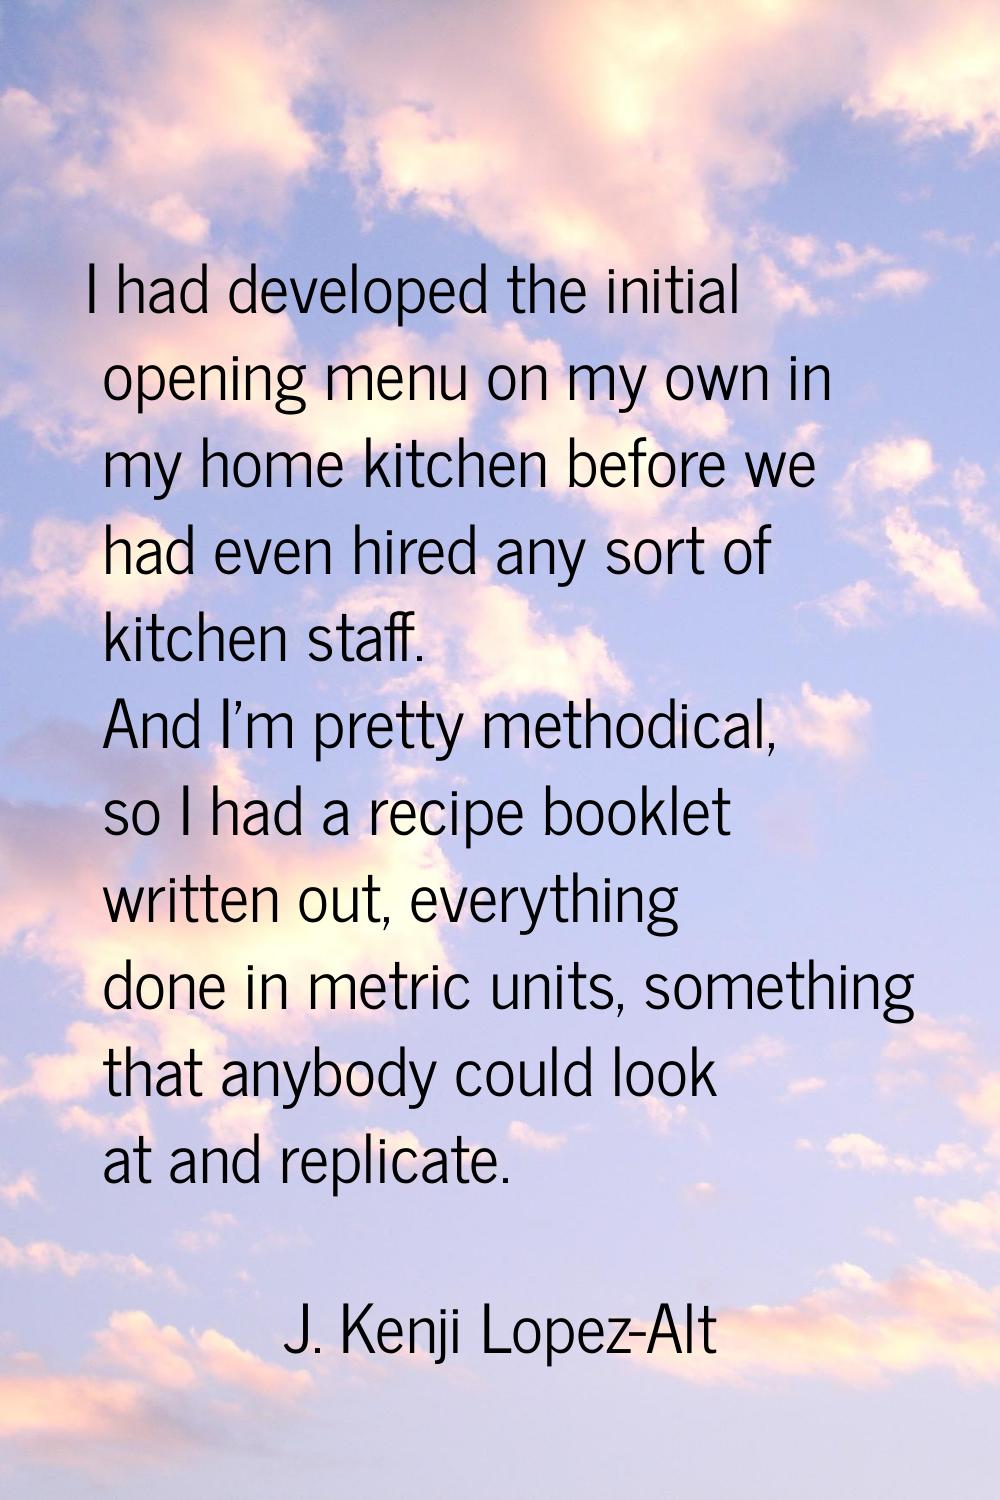 I had developed the initial opening menu on my own in my home kitchen before we had even hired any 